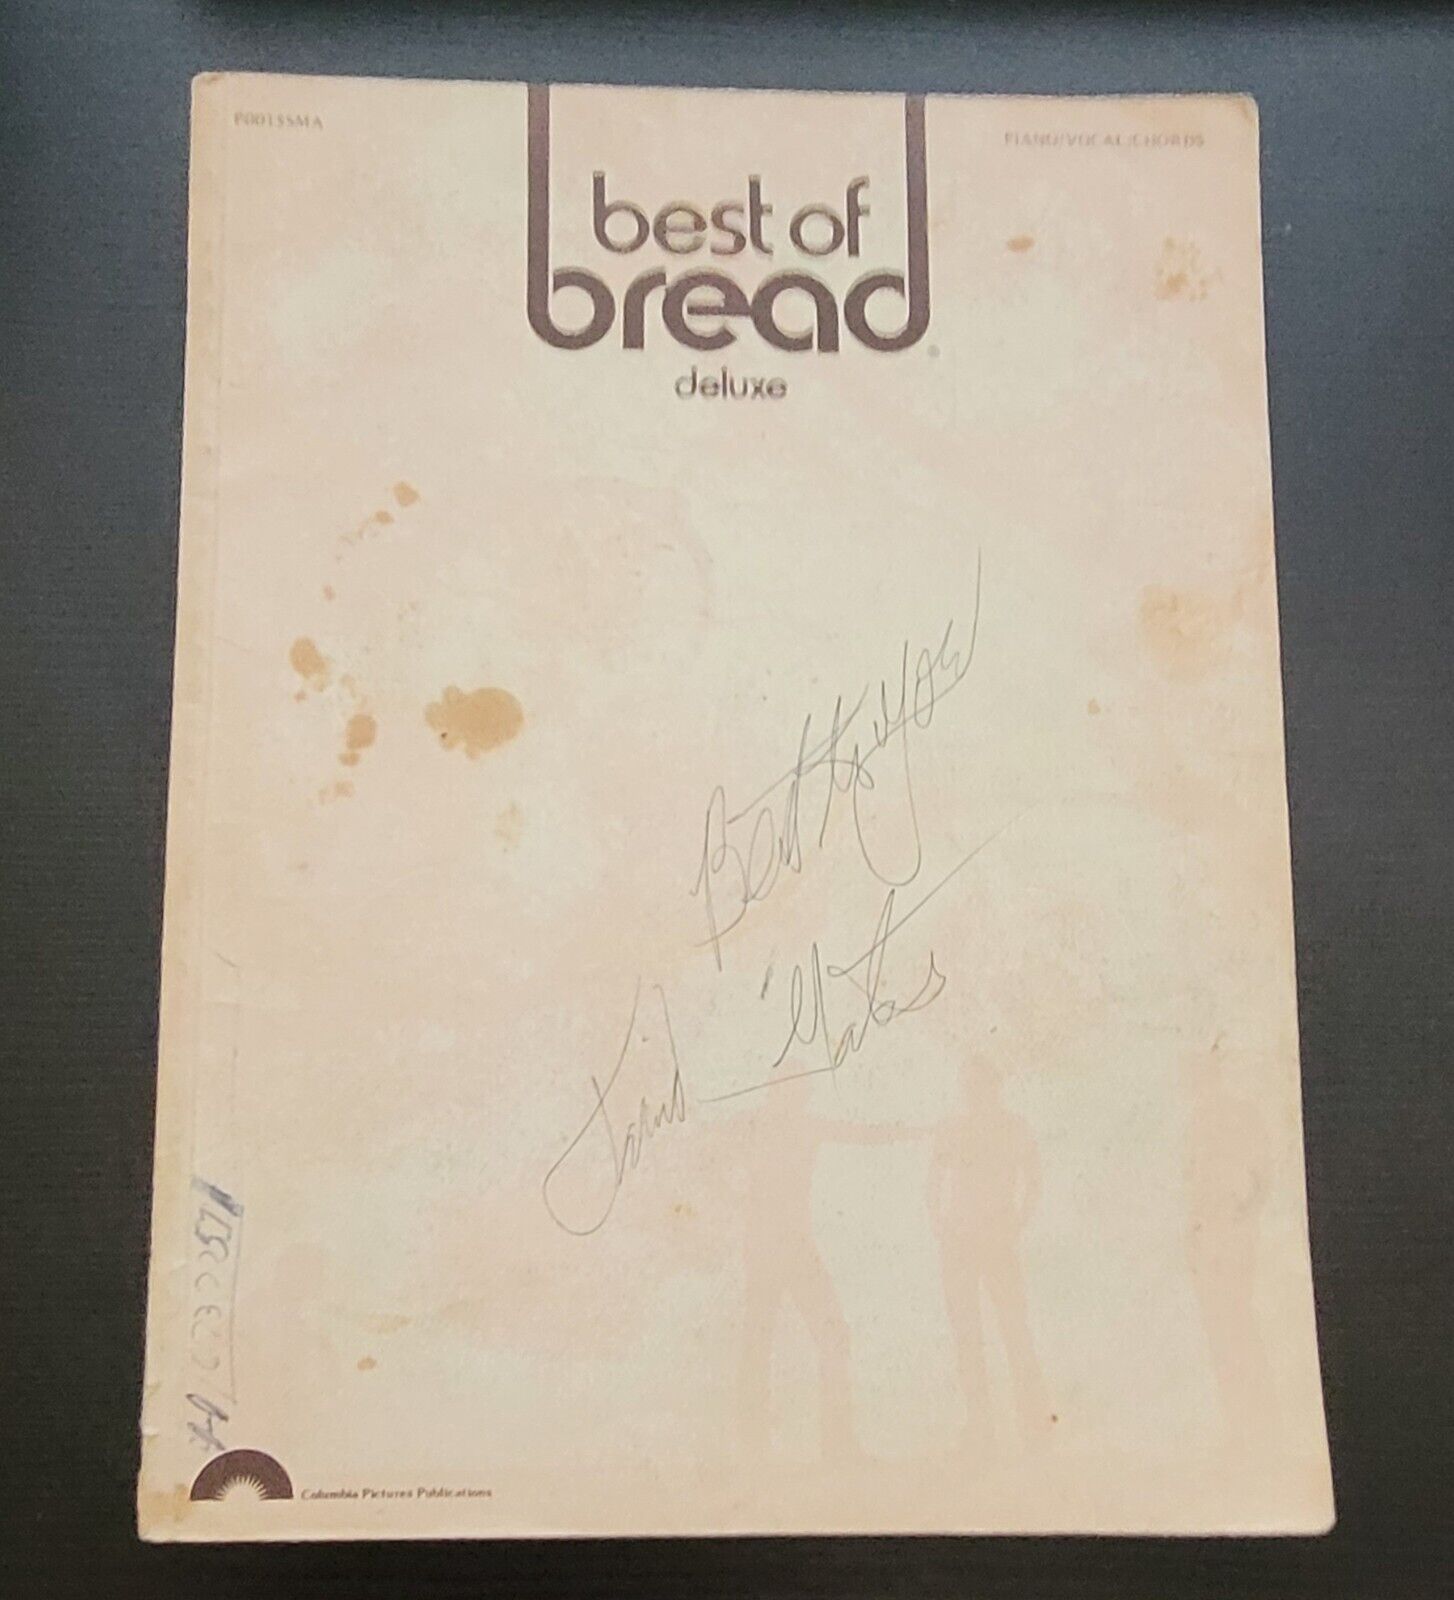 David Gates Autograph, lead singer of BREAD BEST OF PIANO VOCAL CHORDS VINTAGE